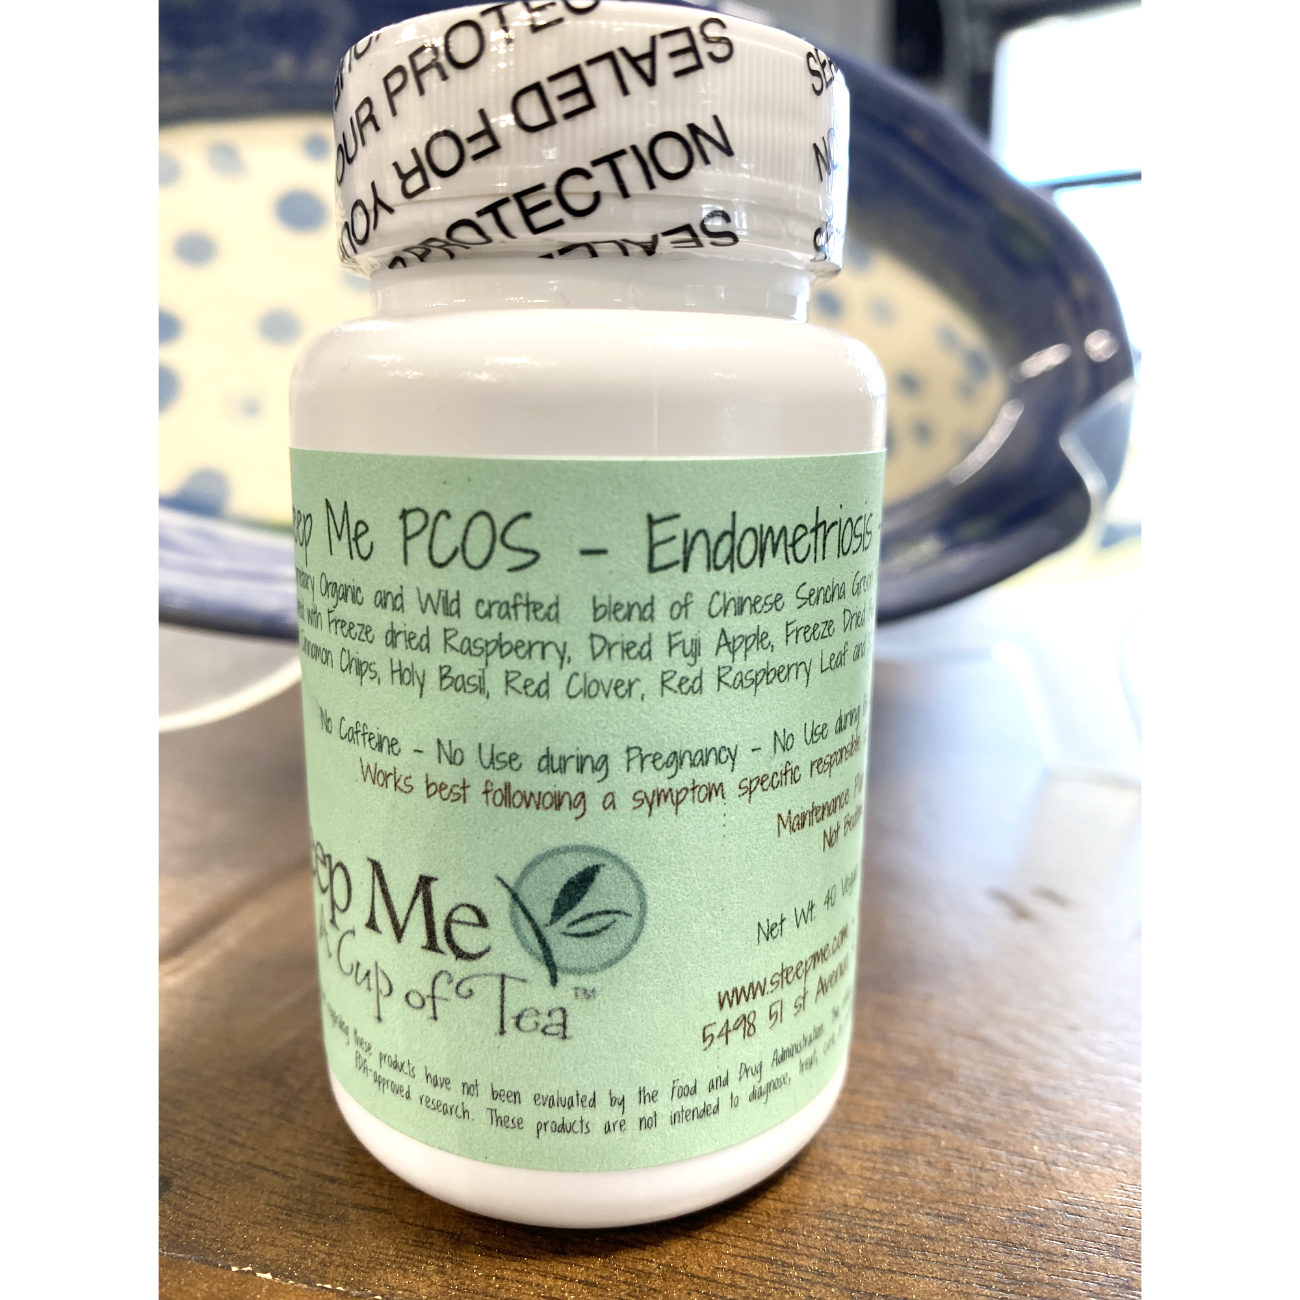 PCOS - Endometriosis This blend will help with reducing the inflammationo the effects of PCOS and Endometriosis.